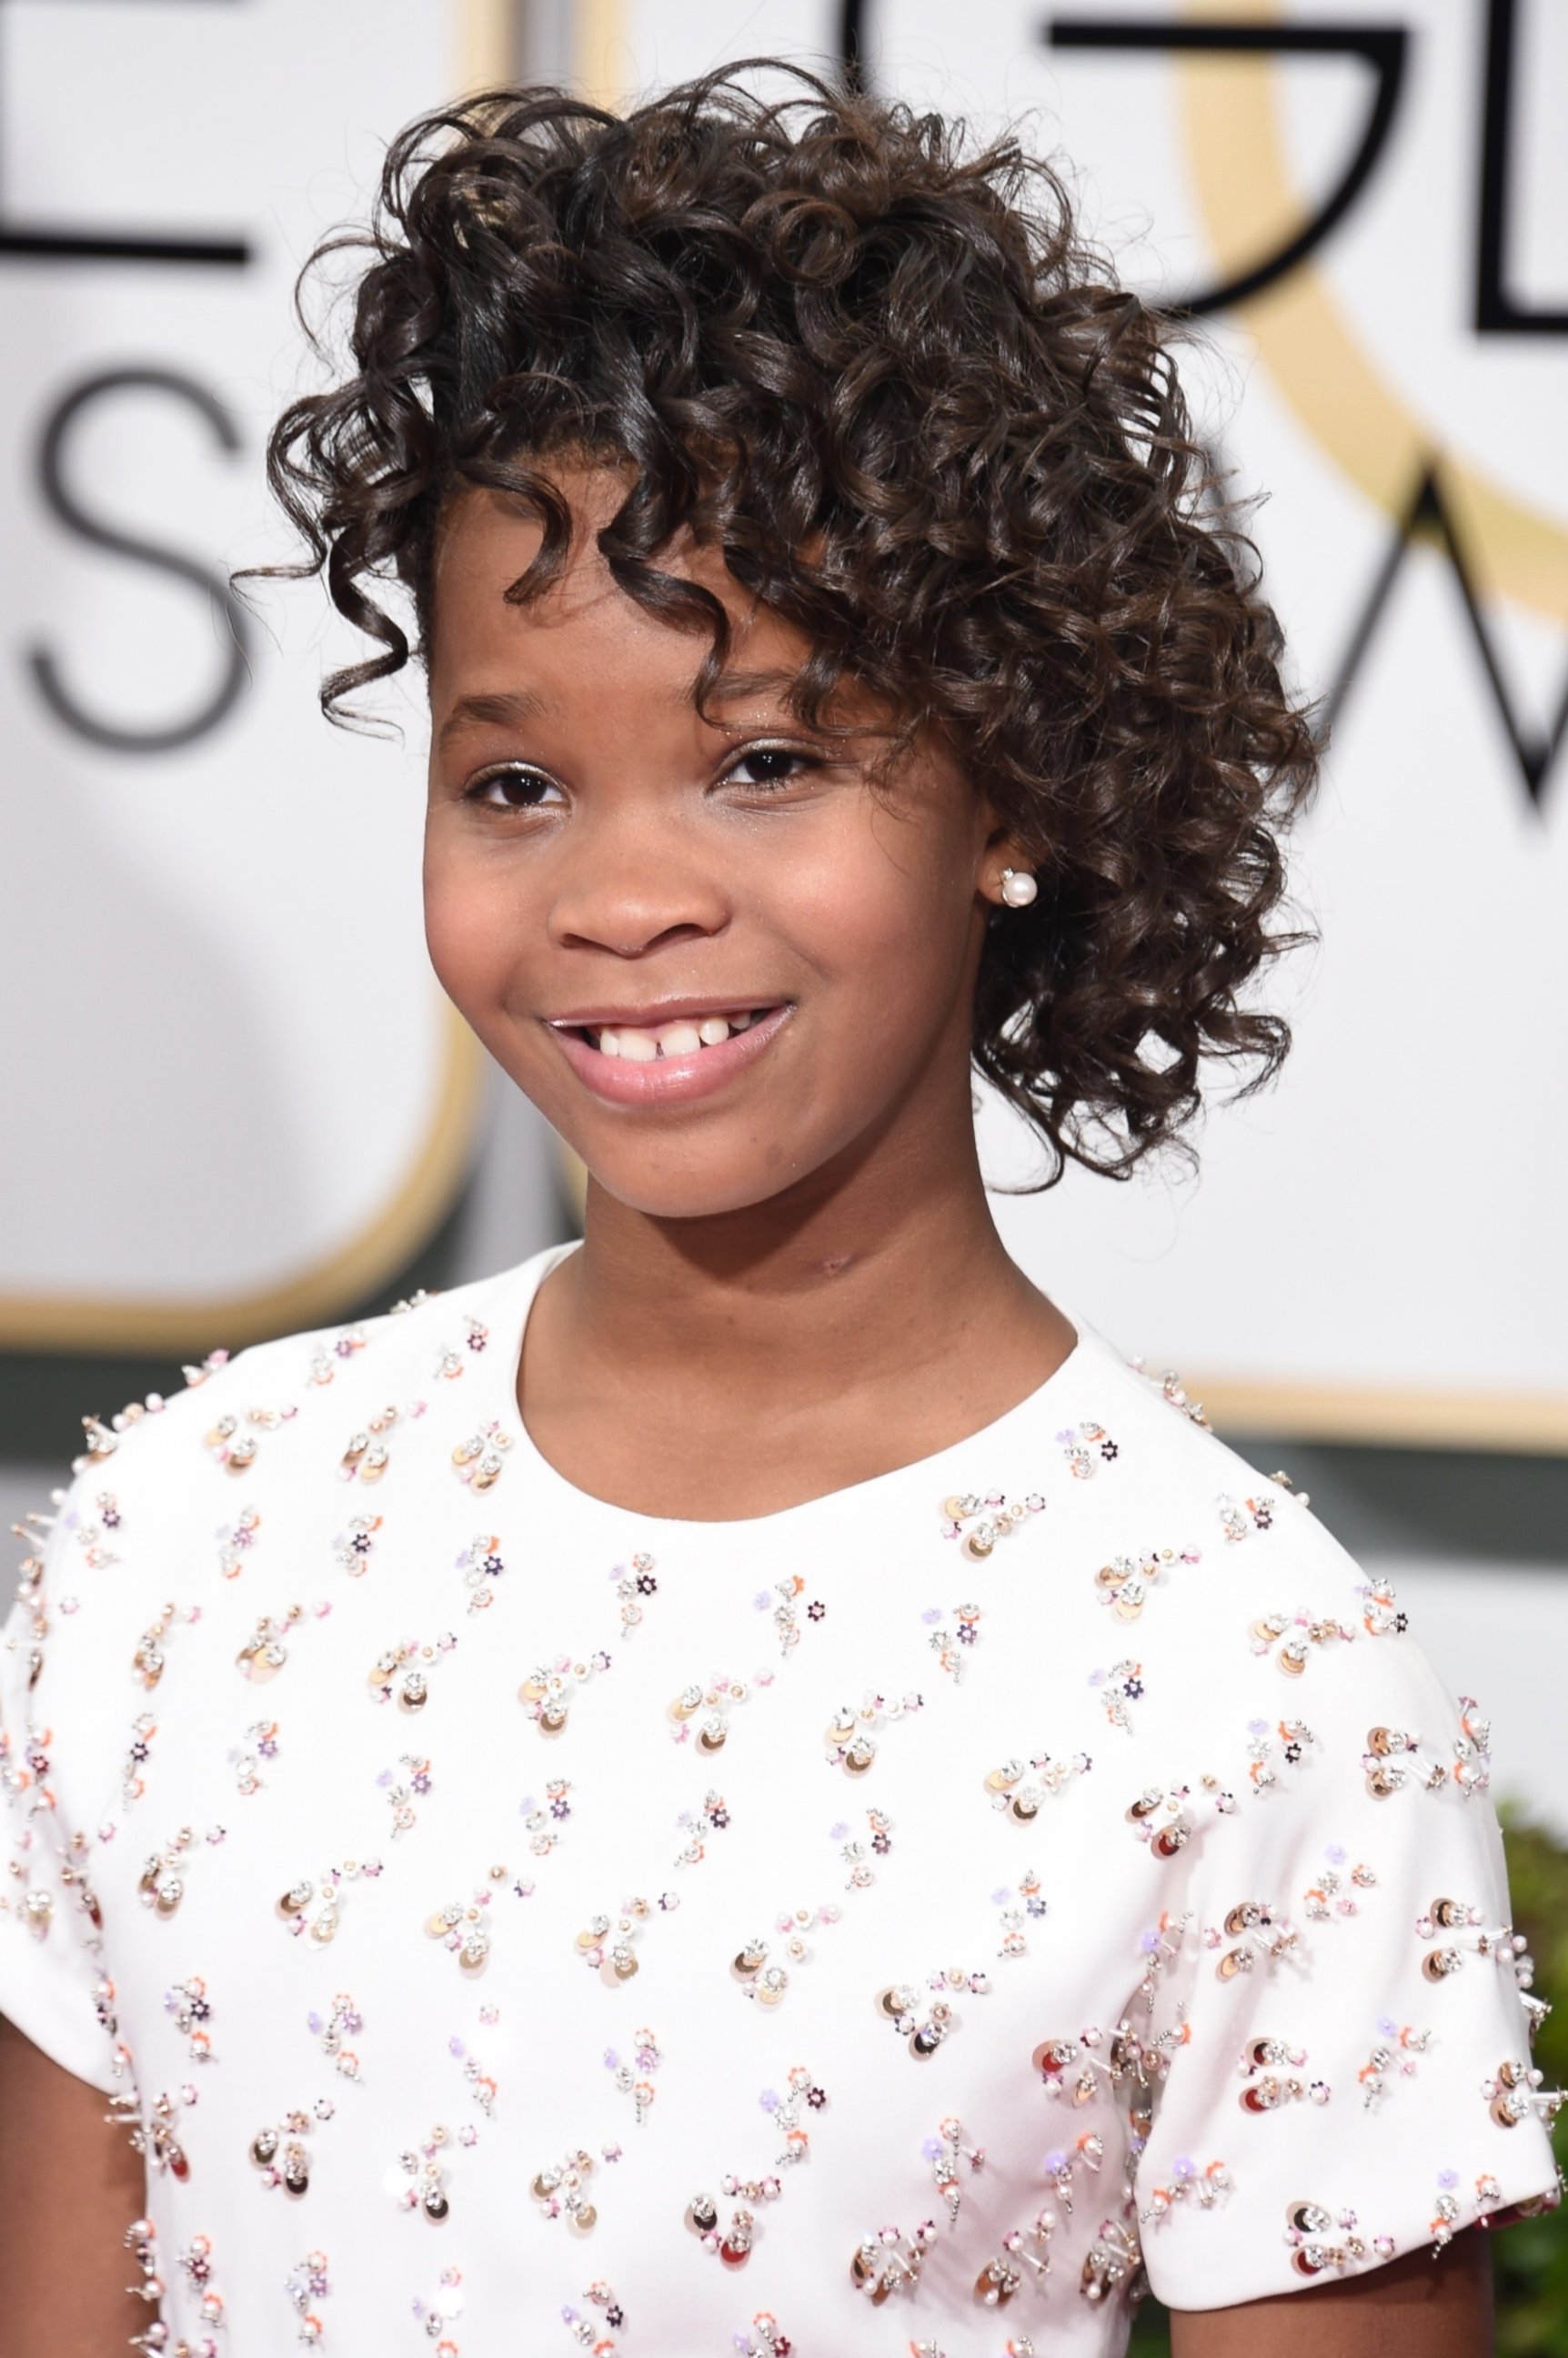 PHOTO: Actress Quvenzhane Wallis arrives on the red carpet for the 72nd annual Golden Globe Awards on Jan. 11, 2015 at the Beverly Hilton Hotel in Beverly Hills, Calif.